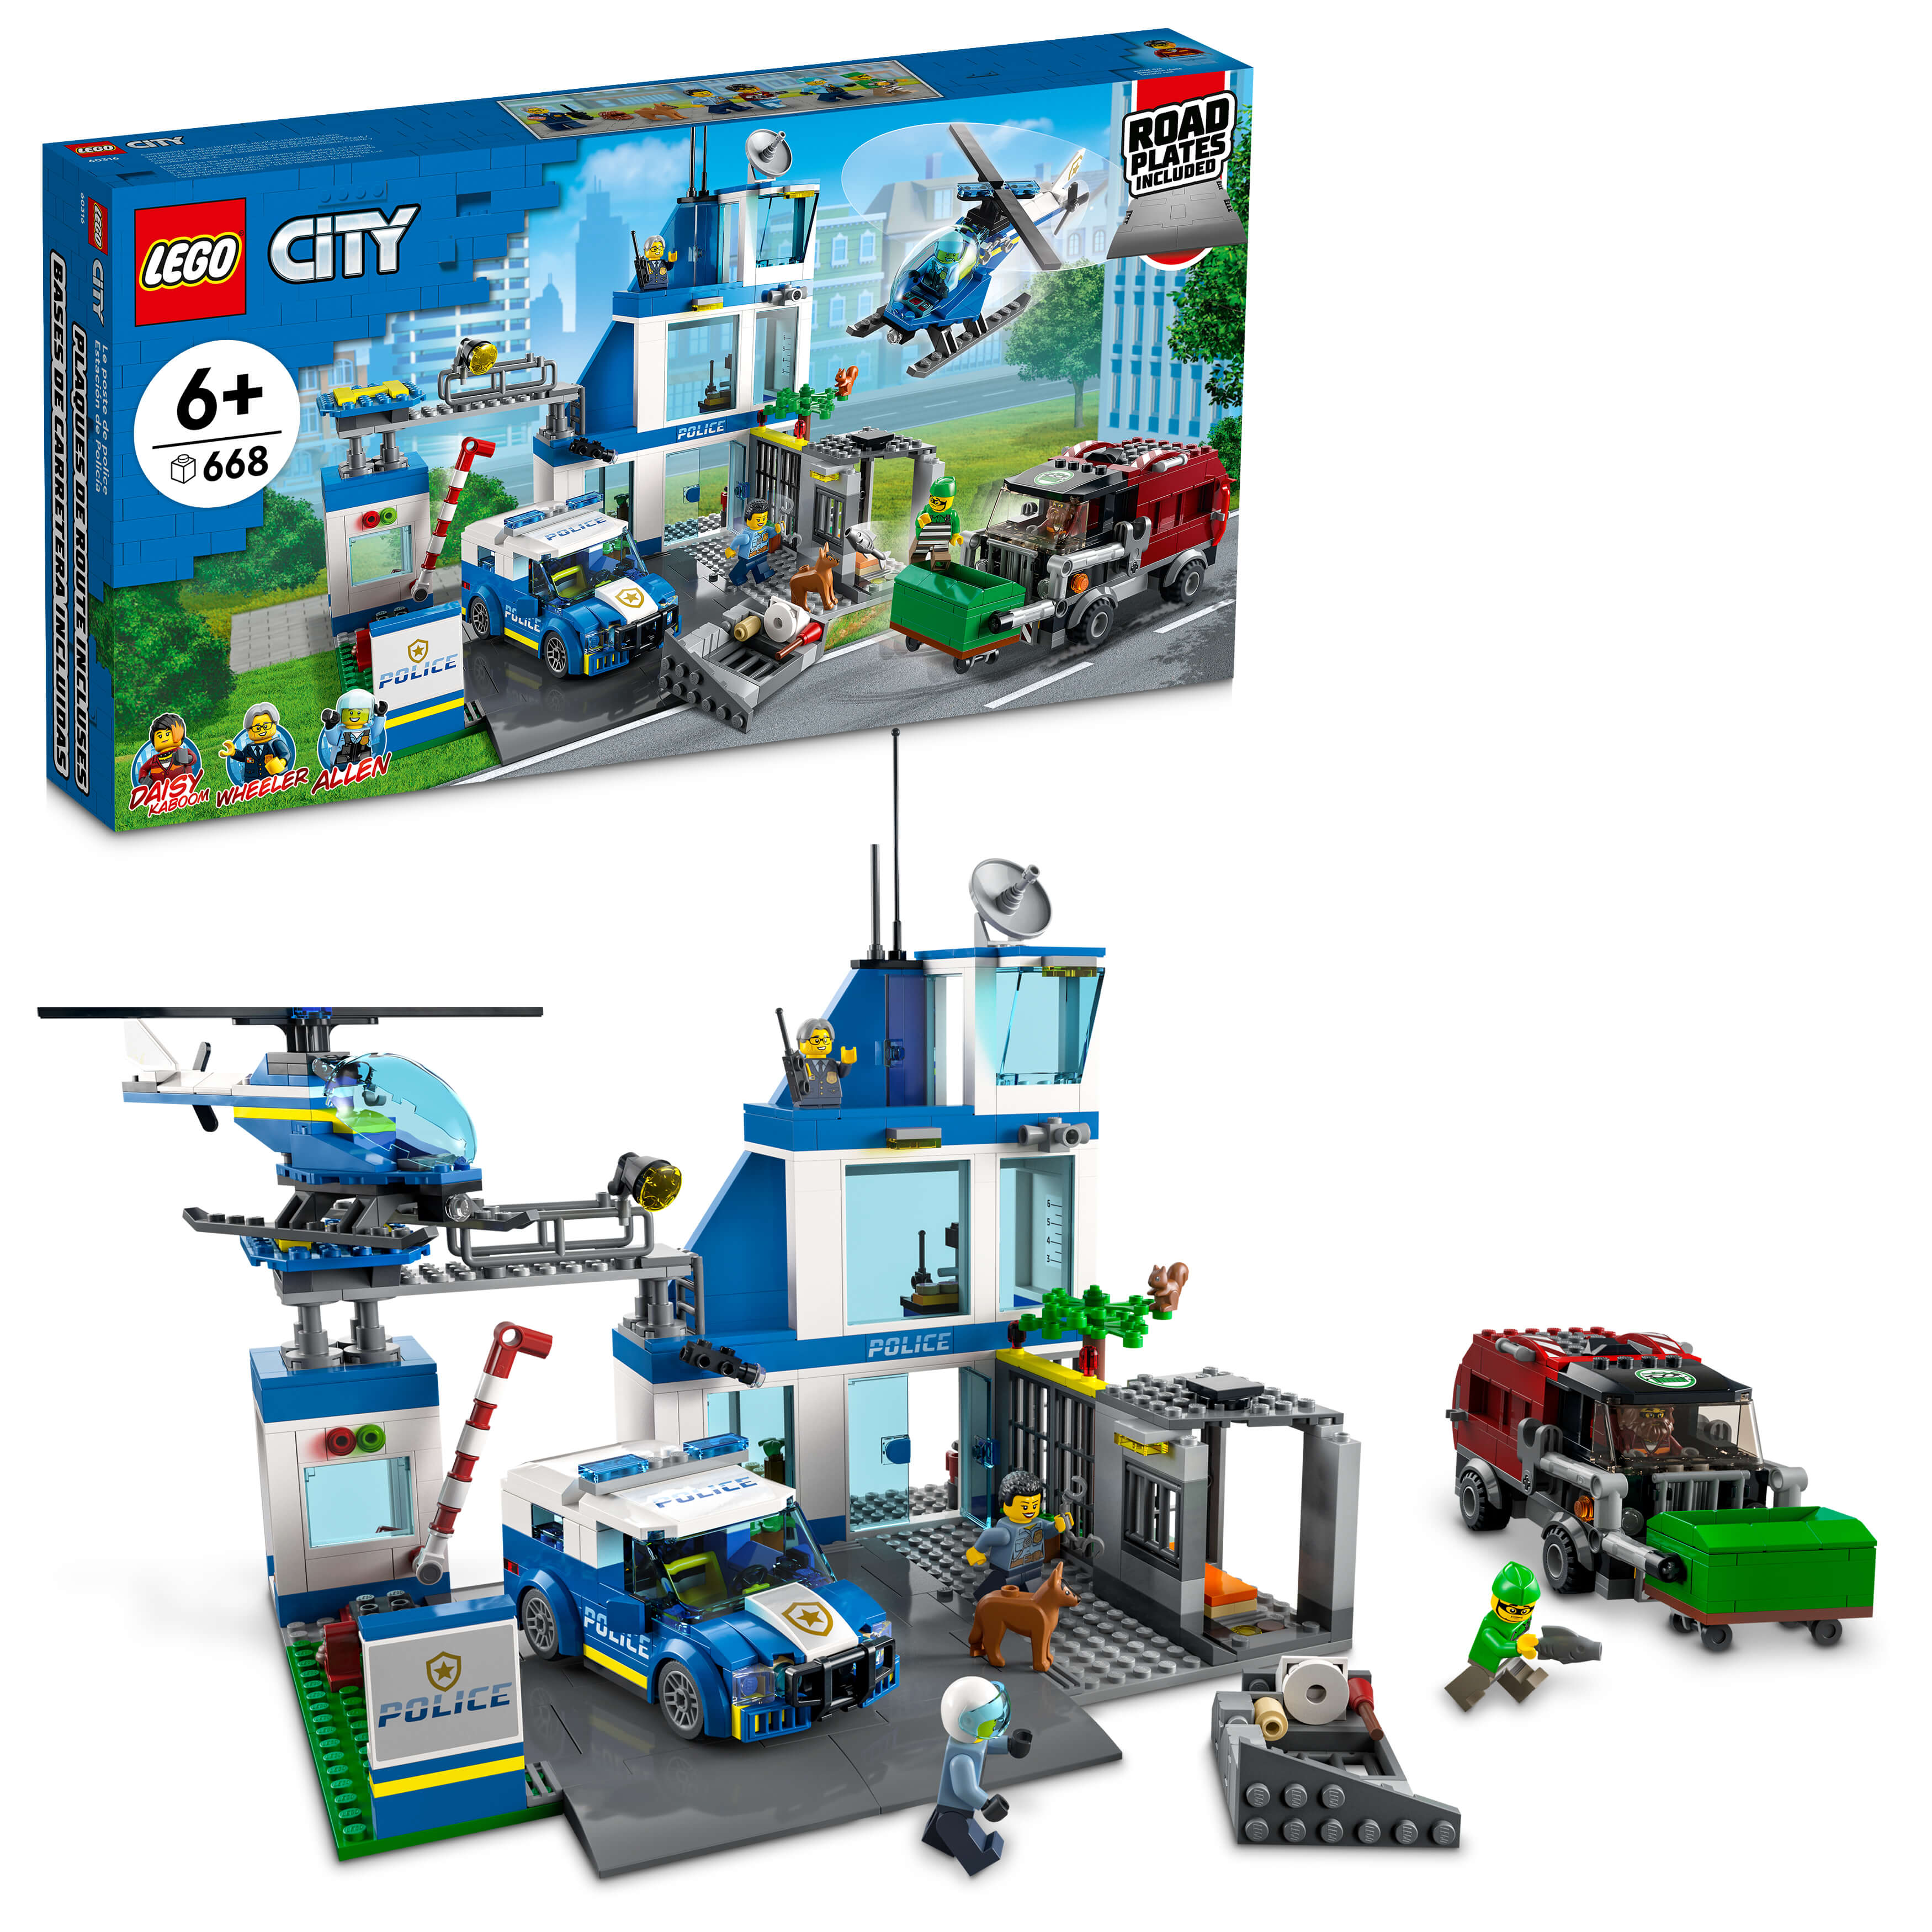 LEGO® City Police Station 60316 Building Kit (668 Pieces)